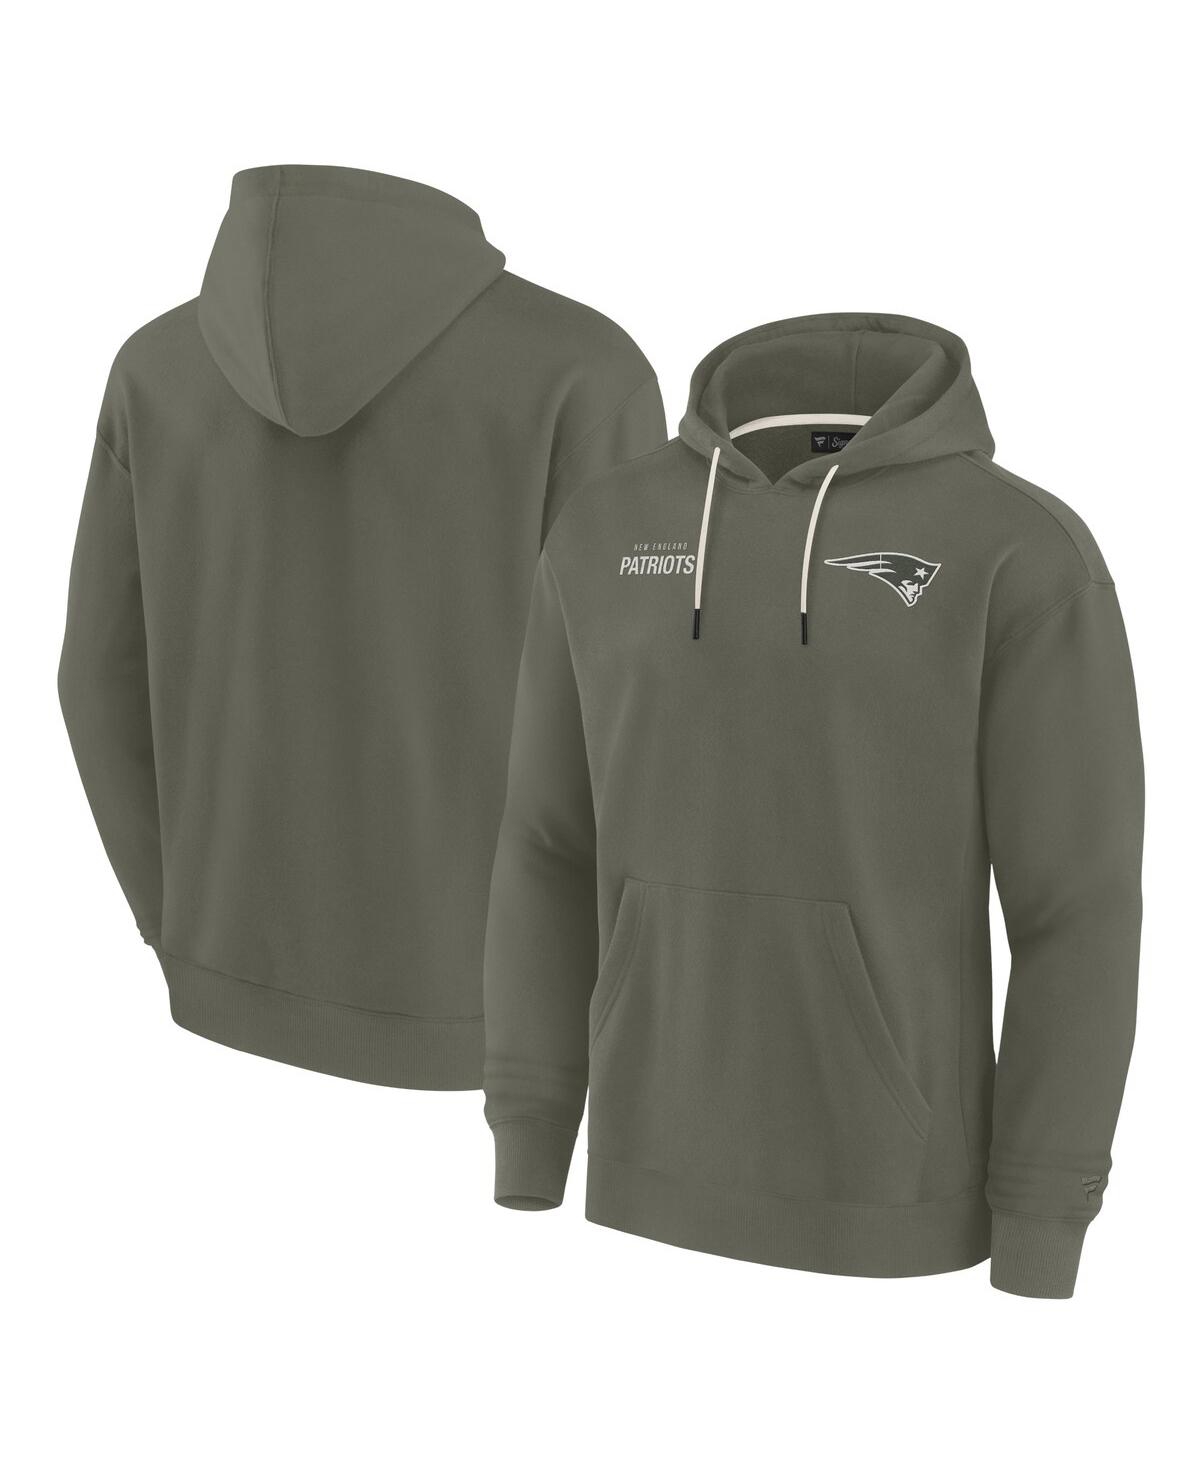 Men's and Women's Olive New England Patriots Elements Super Soft Fleece Pullover Hoodie - Olive